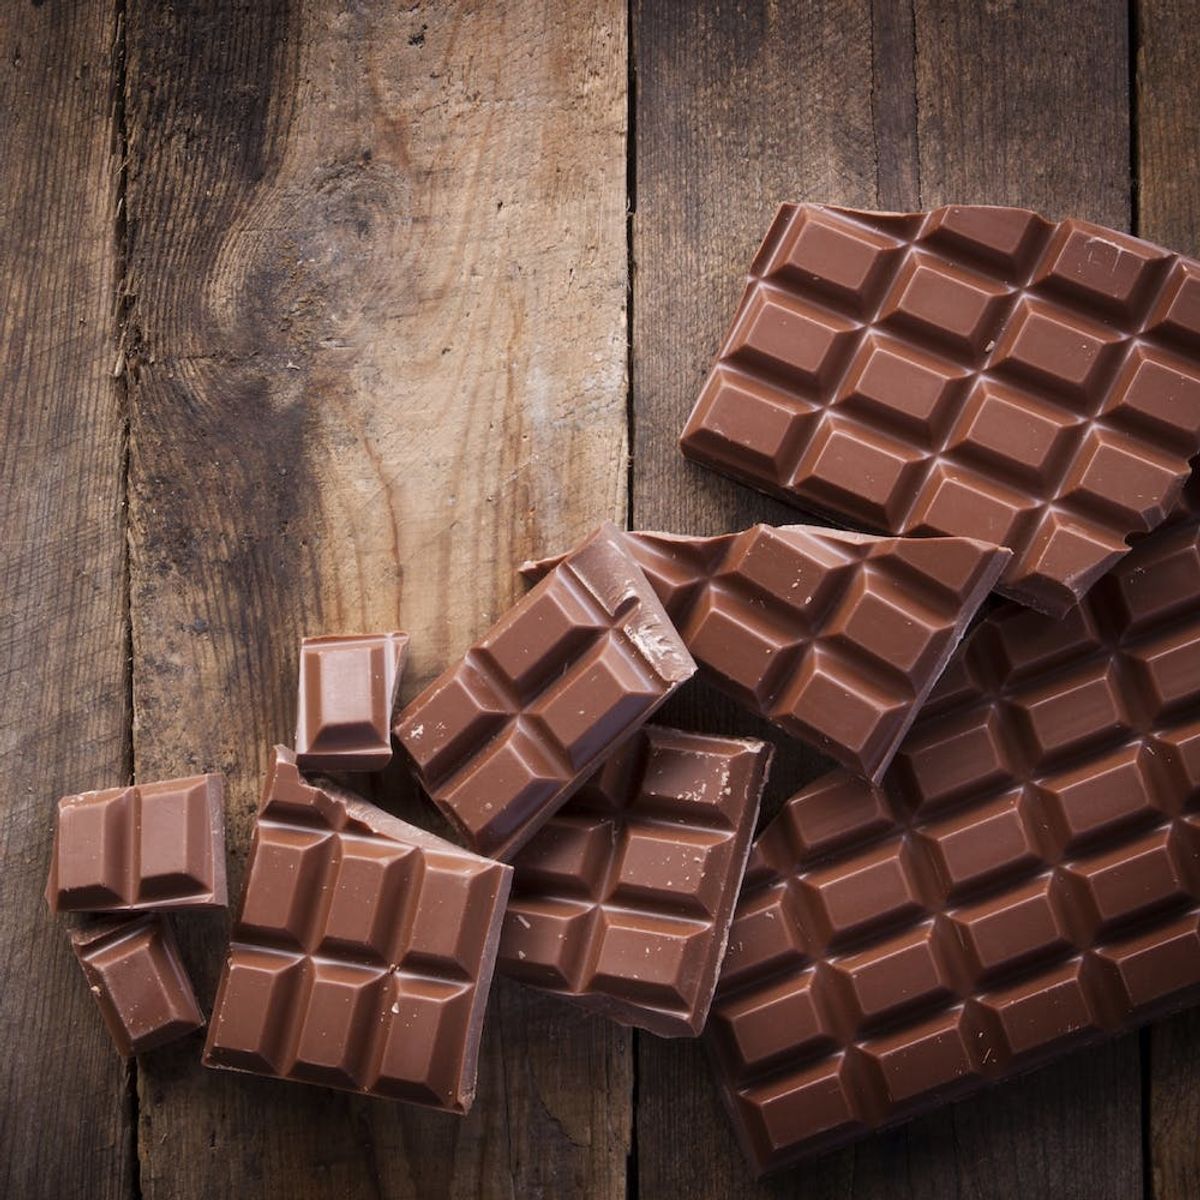 Yay! All That Chocolate You’re Eating Is Making You Smarter